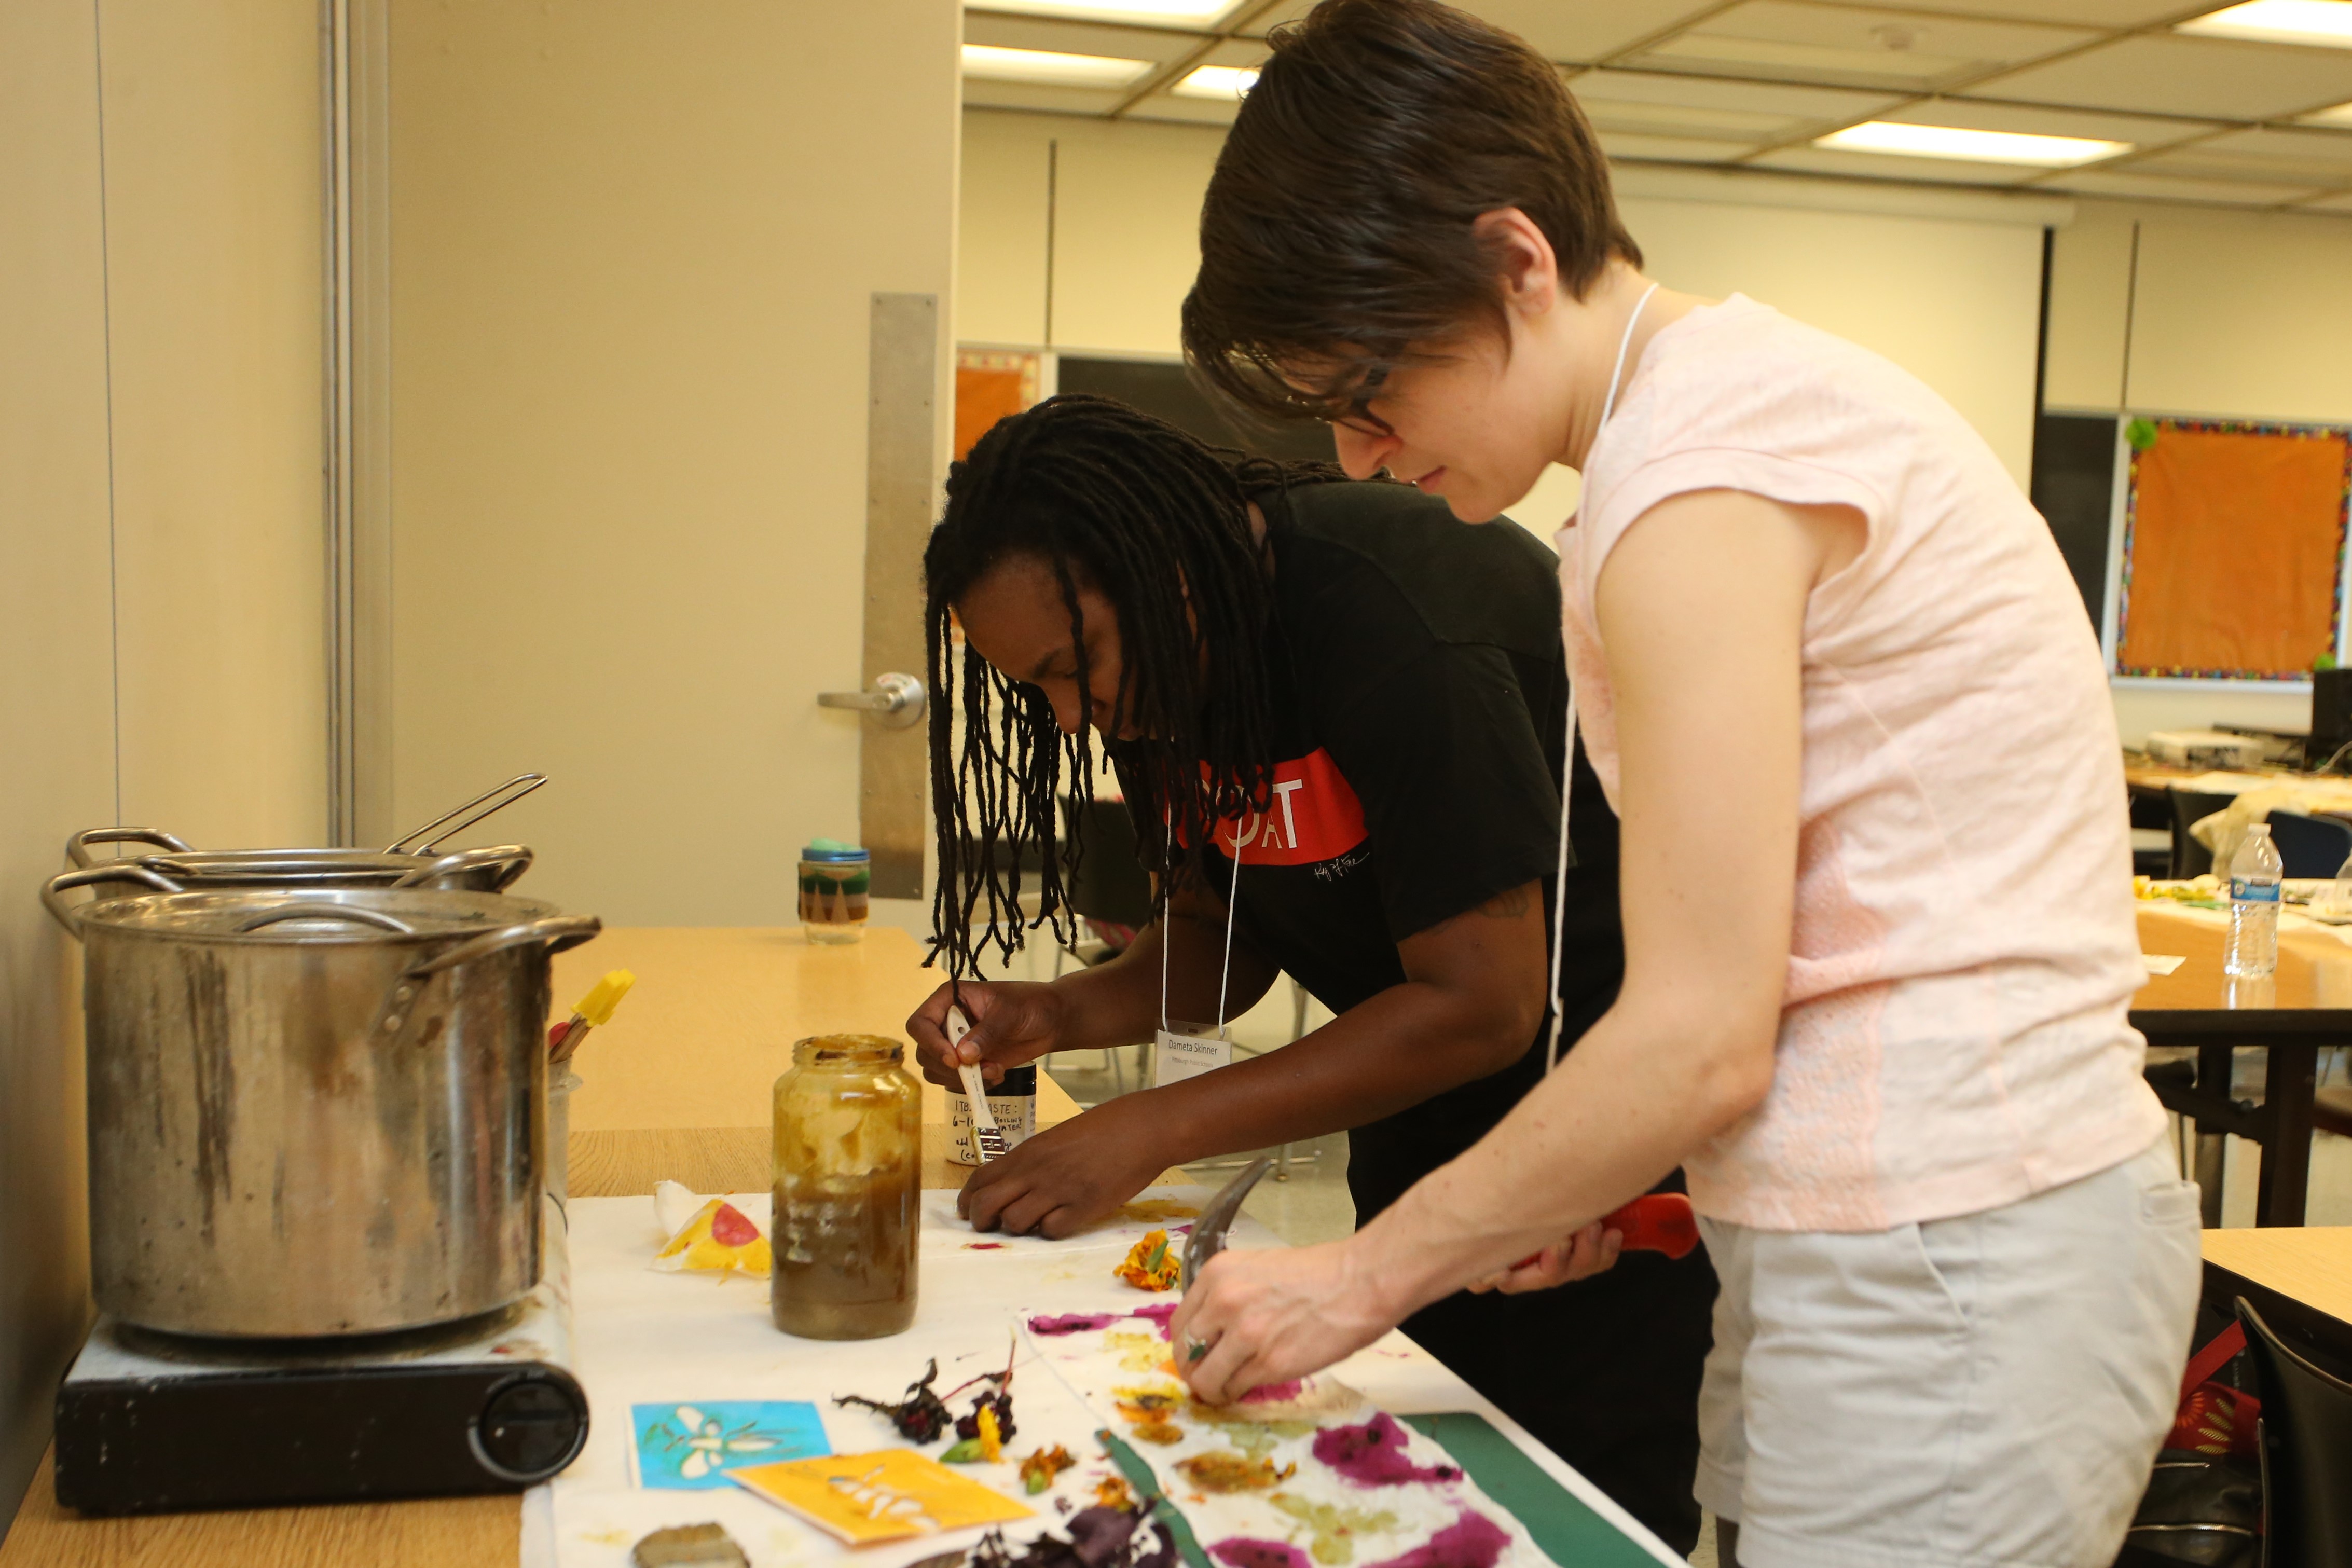 Two educators look closely at projects made using herbal plant dyes.